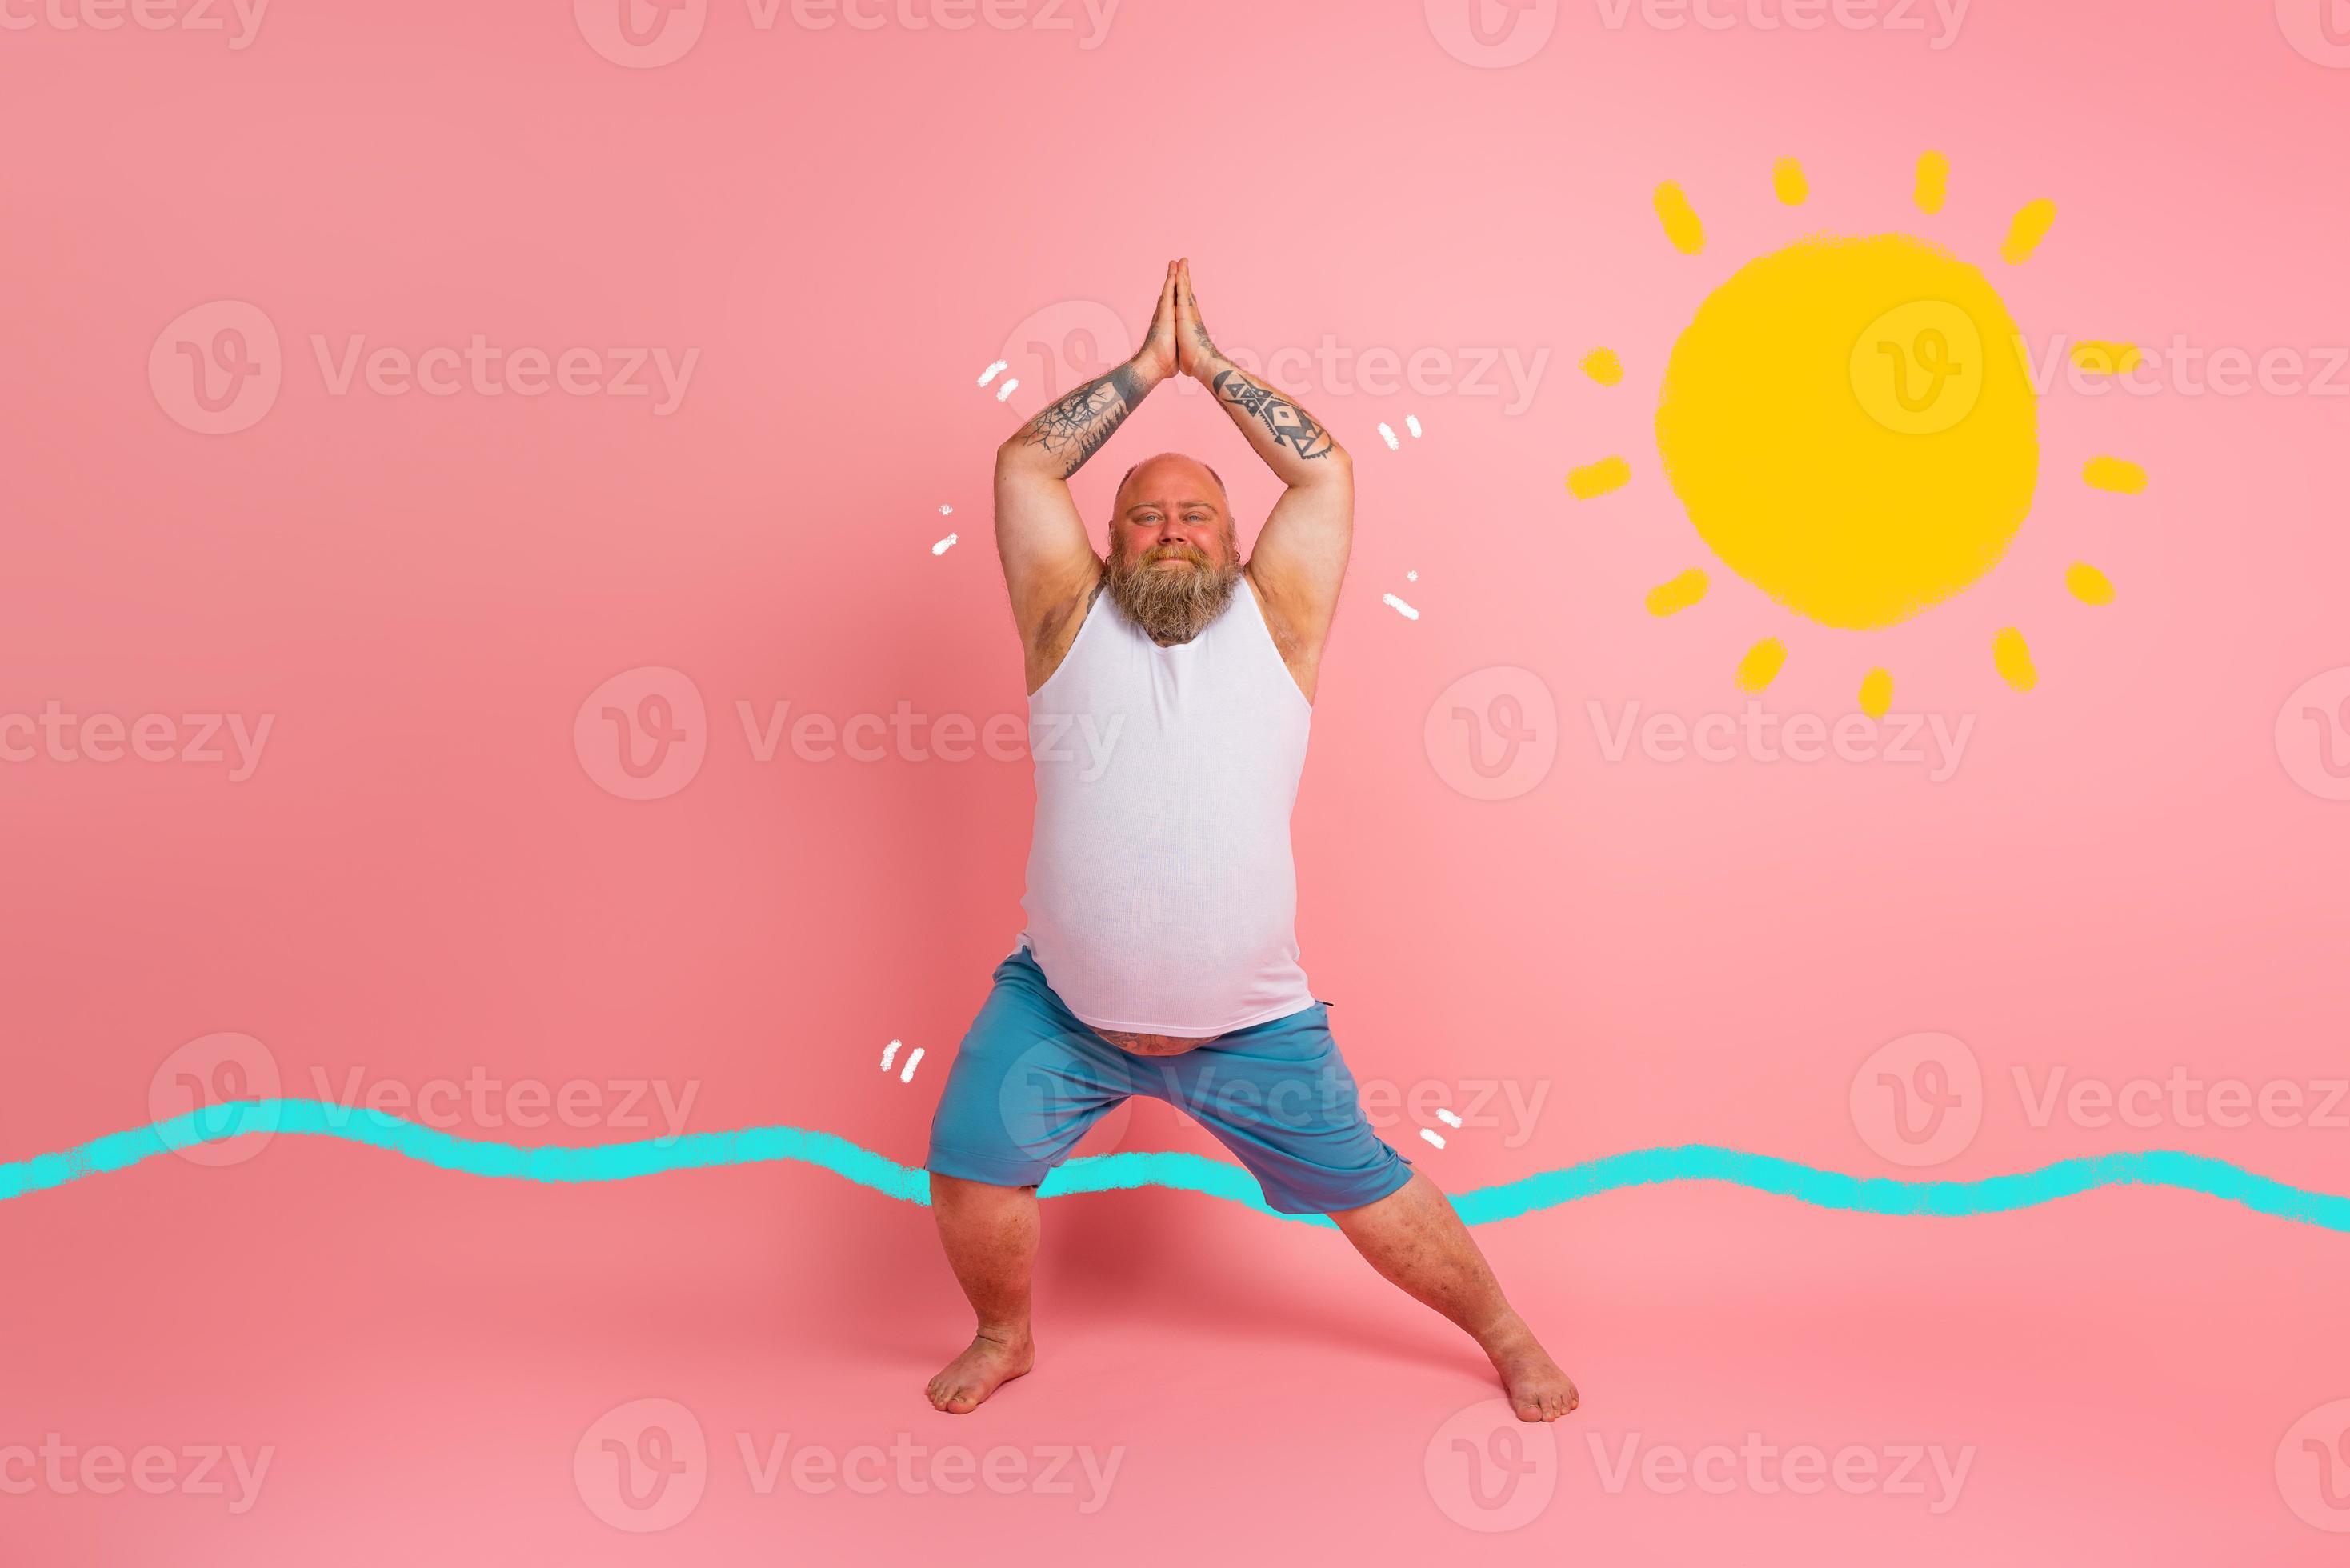 Funny man with beard in yoga position on studio pink background 20688646  Stock Photo at Vecteezy